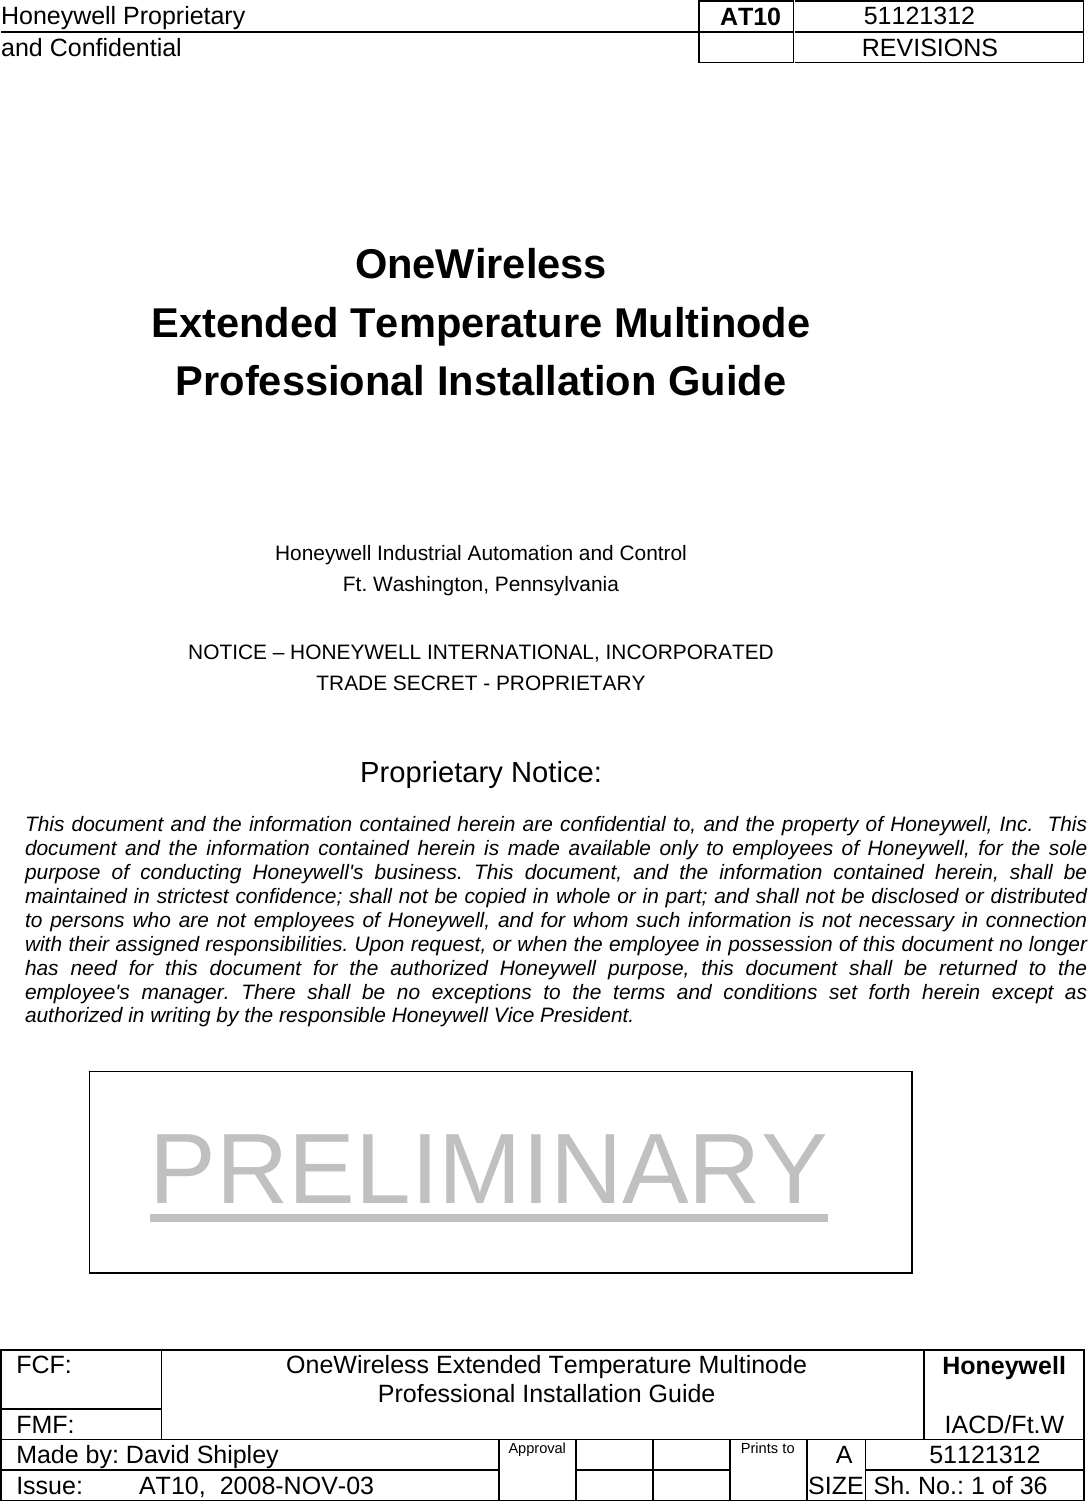 Honeywell Proprietary    AT10           51121312 and Confidential             REVISIONS  FCF: OneWireless Extended Temperature Multinode  Professional Installation Guide  Honeywell FMF:               IACD/Ft.W Made by: David Shipley  Approval   Prints to     A           51121312 Issue:        AT10,  2008-NOV-03          SIZE  Sh. No.: 1 of 36      OneWireless  Extended Temperature Multinode  Professional Installation Guide      Honeywell Industrial Automation and Control Ft. Washington, Pennsylvania  NOTICE – HONEYWELL INTERNATIONAL, INCORPORATED TRADE SECRET - PROPRIETARY   Proprietary Notice:  This document and the information contained herein are confidential to, and the property of Honeywell, Inc.  This document and the information contained herein is made available only to employees of Honeywell, for the sole purpose of conducting Honeywell&apos;s business. This document, and the information contained herein, shall be maintained in strictest confidence; shall not be copied in whole or in part; and shall not be disclosed or distributed to persons who are not employees of Honeywell, and for whom such information is not necessary in connection with their assigned responsibilities. Upon request, or when the employee in possession of this document no longer has need for this document for the authorized Honeywell purpose, this document shall be returned to the employee&apos;s manager. There shall be no exceptions to the terms and conditions set forth herein except as authorized in writing by the responsible Honeywell Vice President. PRELIMINARY 